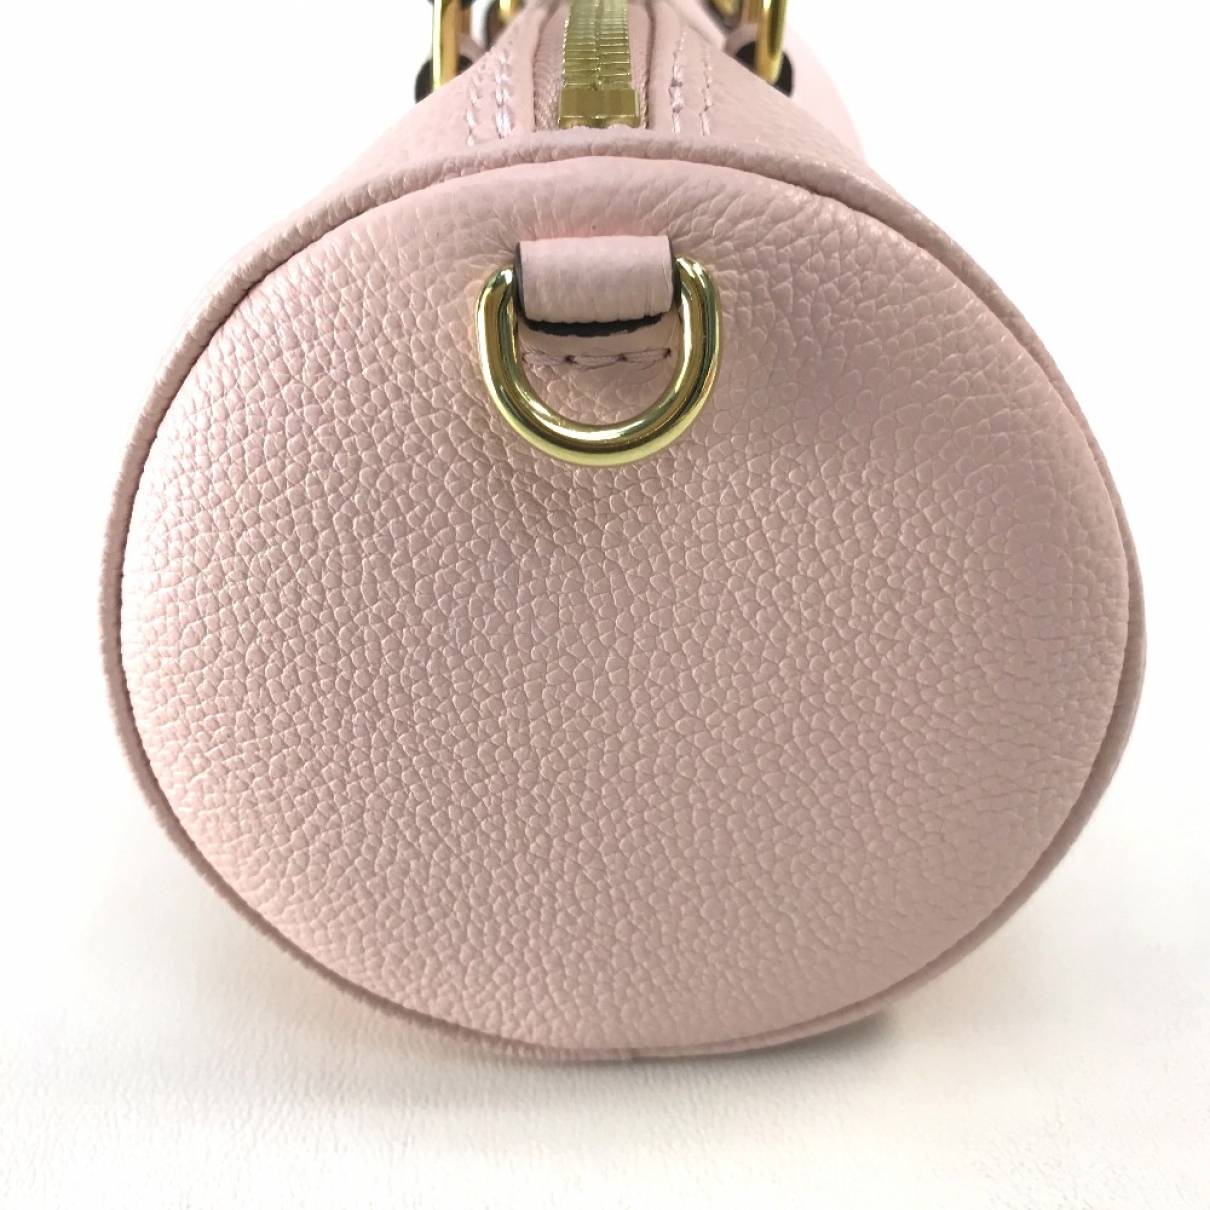 Louis Vuitton - Authenticated Nano Speedy / Mini HL Handbag - Leather Pink for Women, Very Good Condition